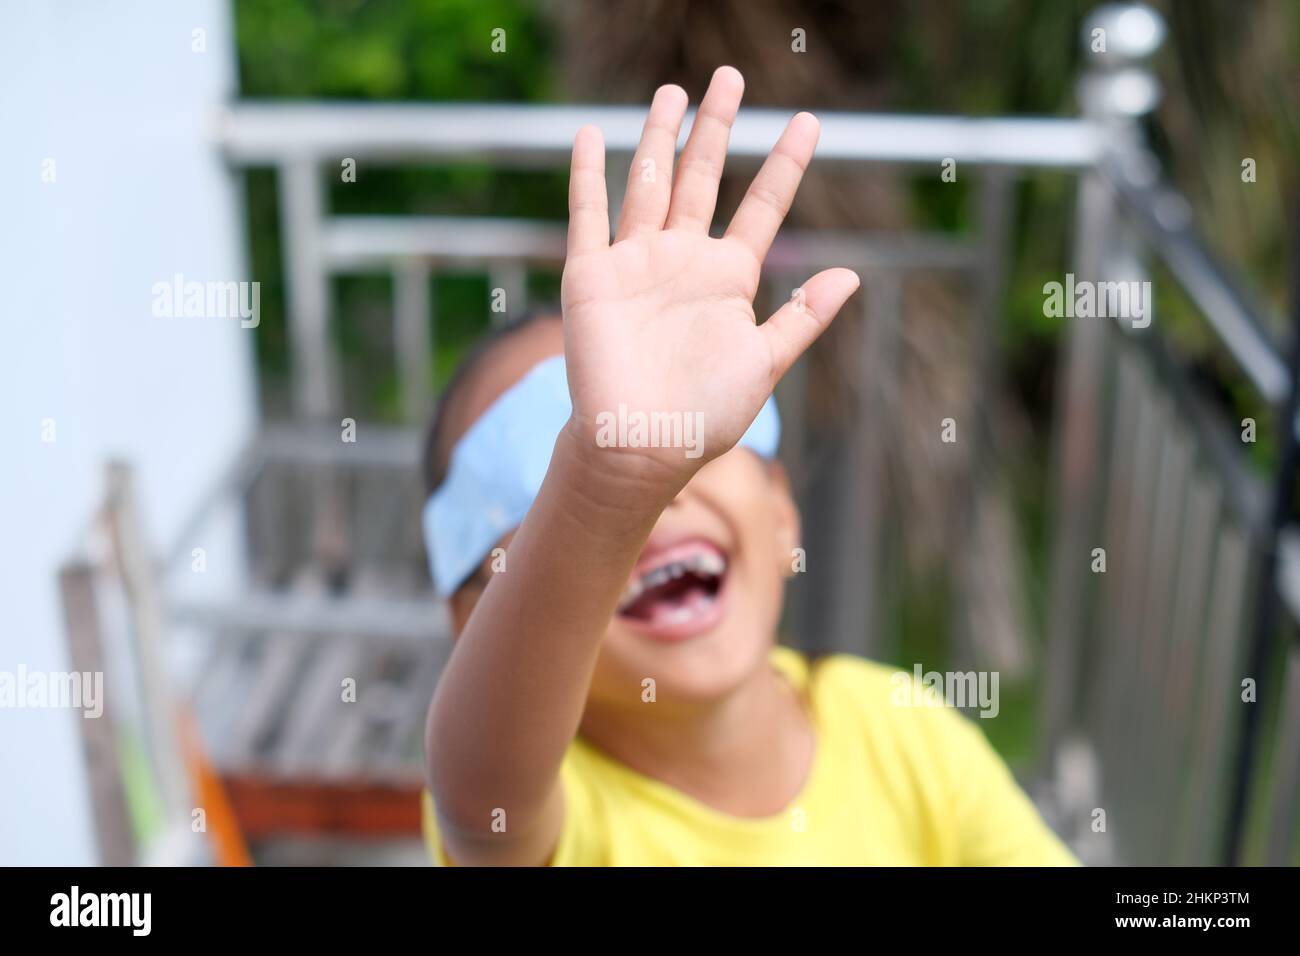 Focus on hand. Little girl eyes closed hands resisting with hands. The concept of violence against children Stock Photo